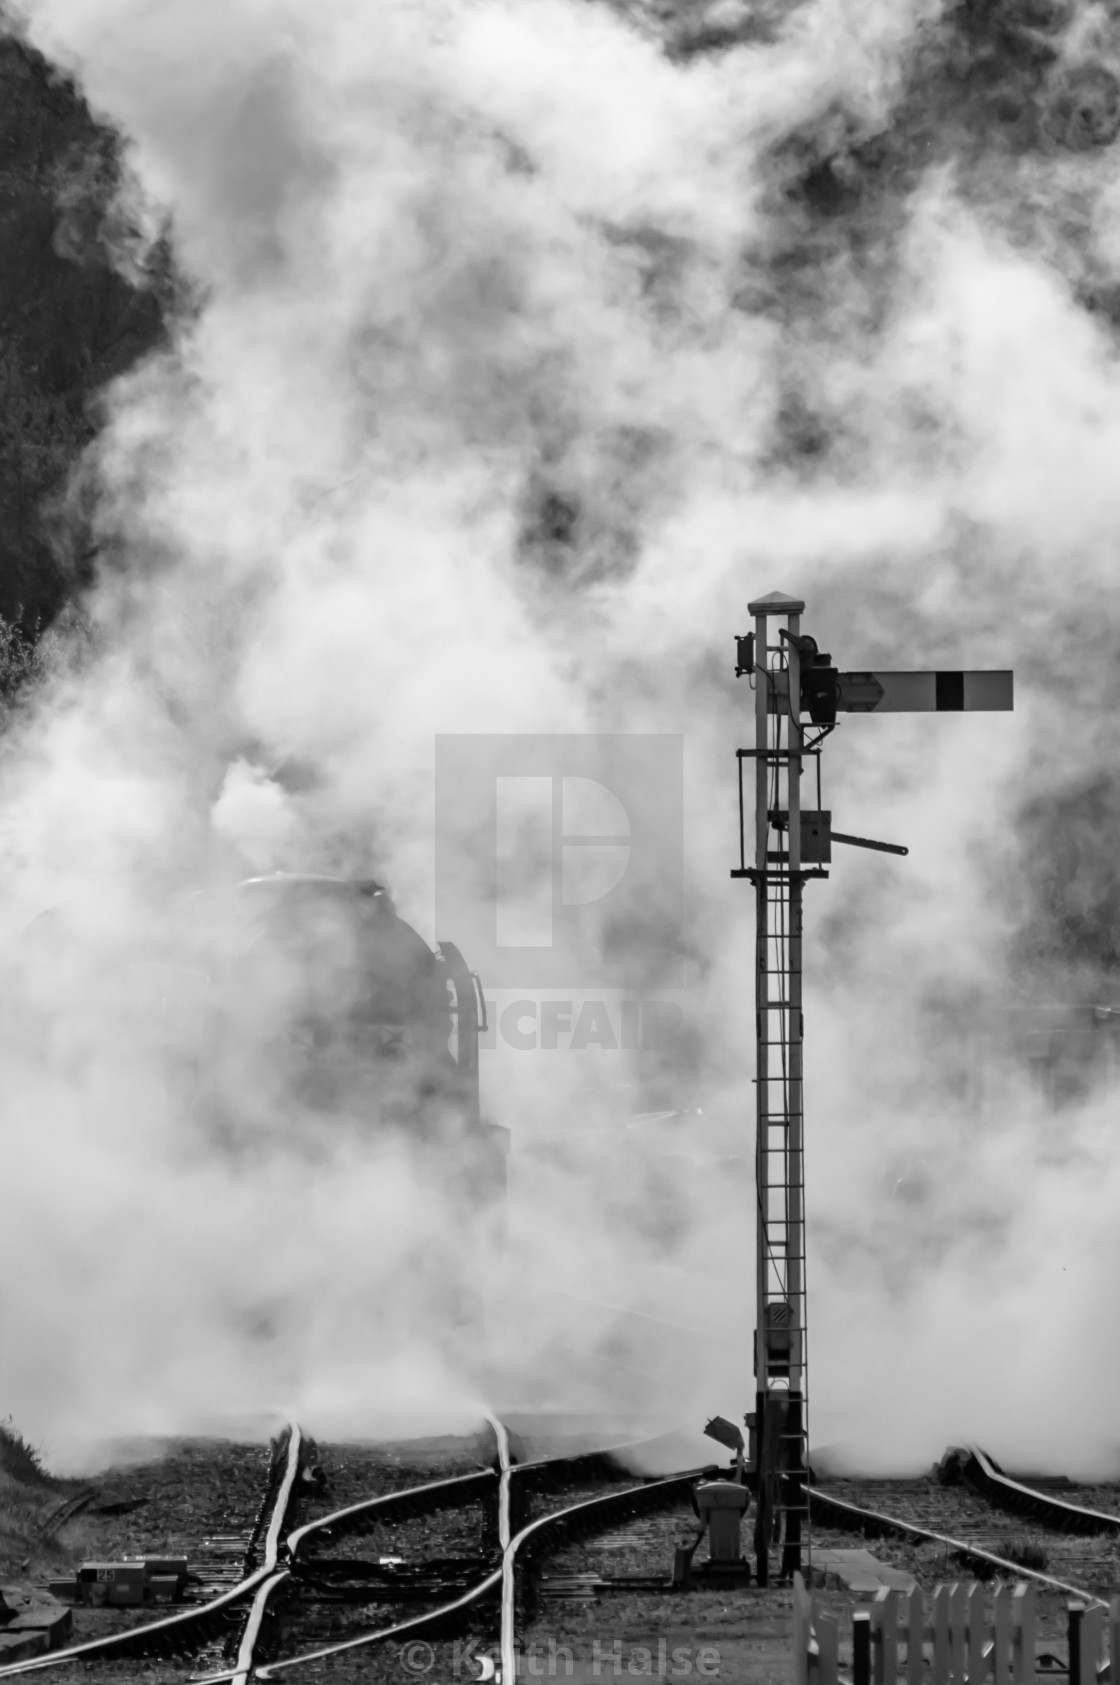 "Steam locomotive emerging from the smoke" stock image